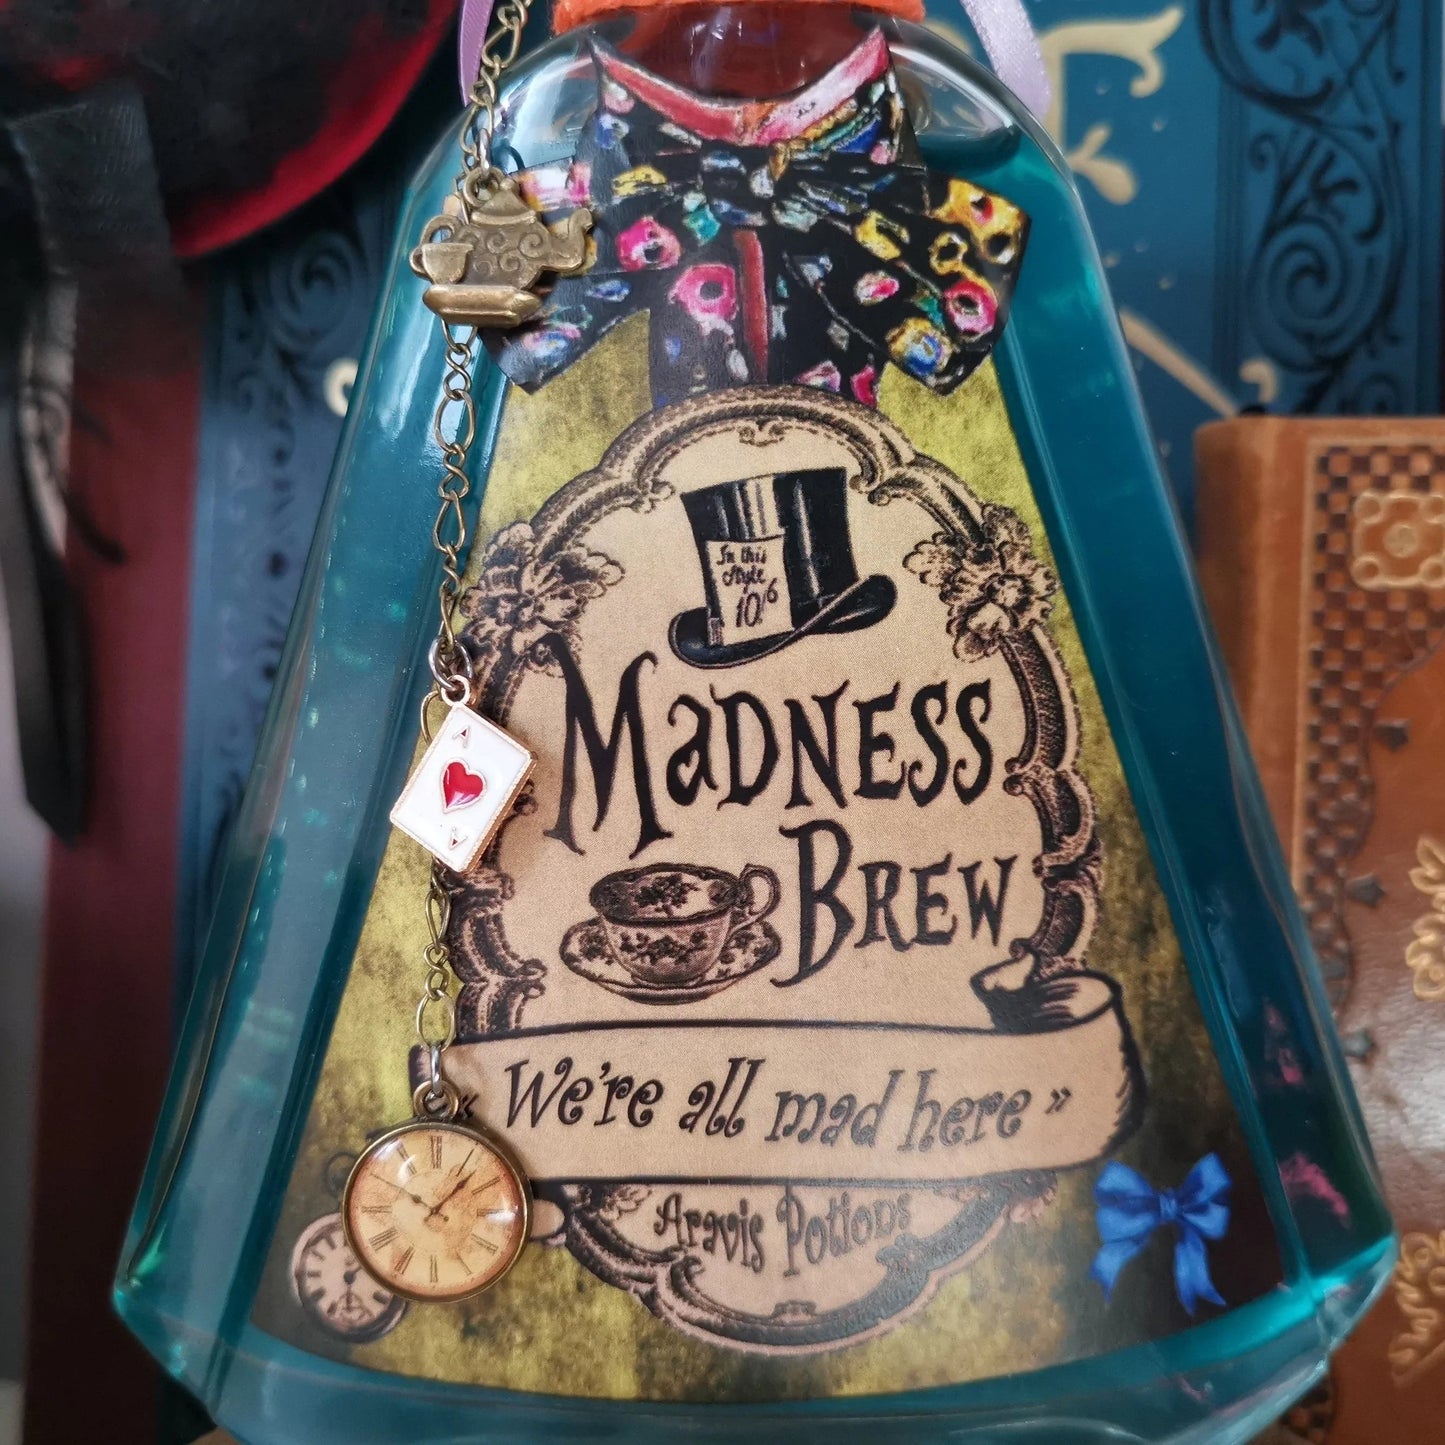 Madness Brew Aravis Potions Apothecary Harry Potter